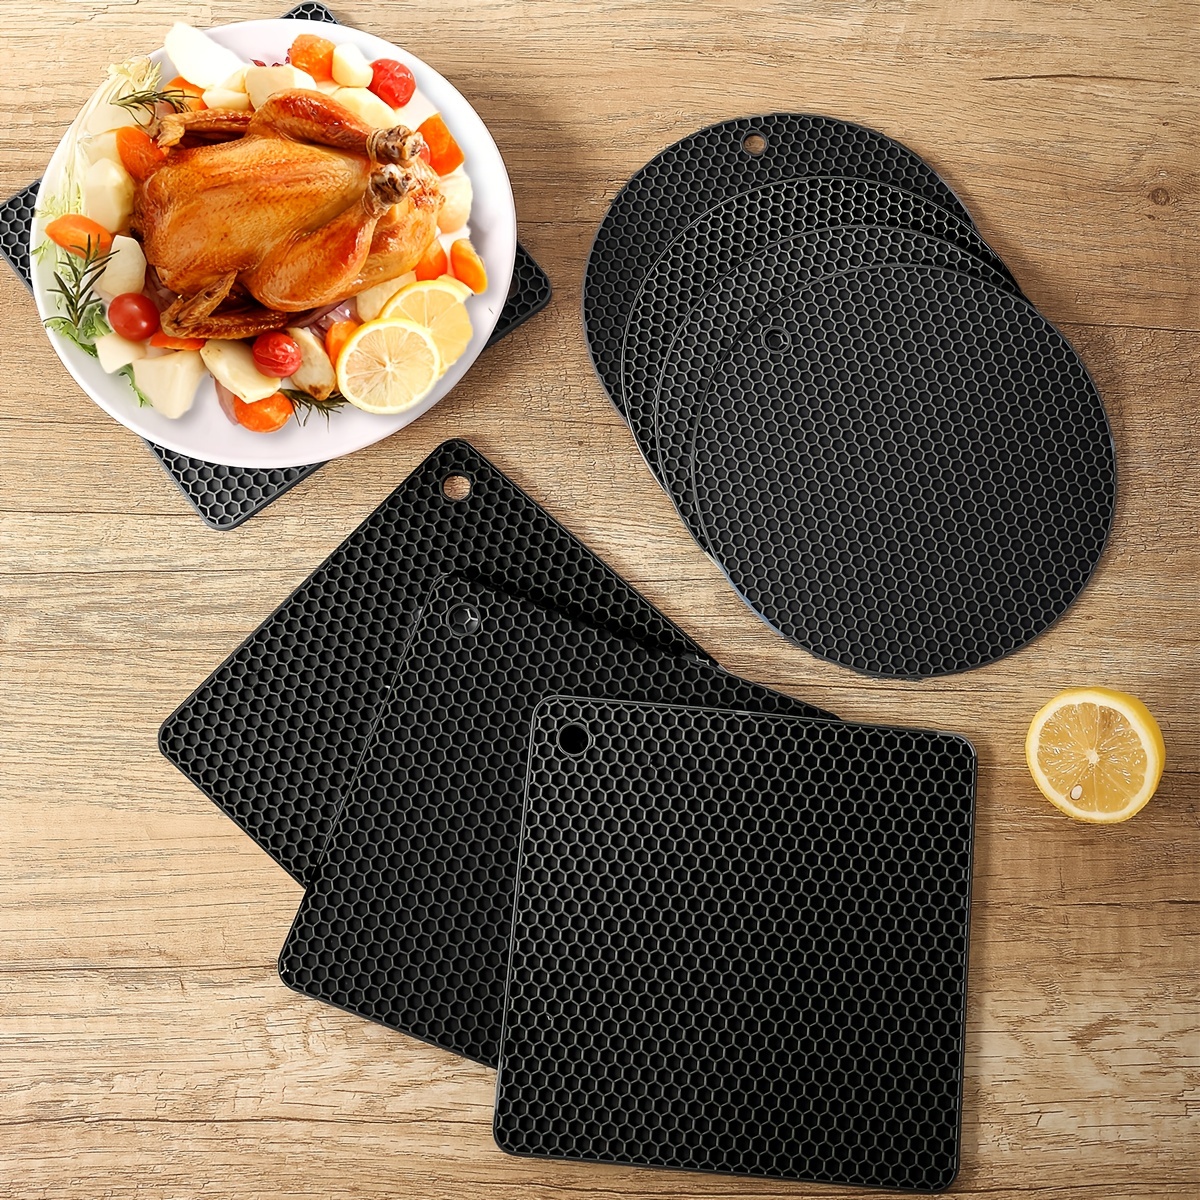 3PCS Insulation Silicone Mats Non-Slip Heat-Resistant Anti-Scalding  Microwave Oven Mat Pot Holder Coasters Heat Resistant Pads